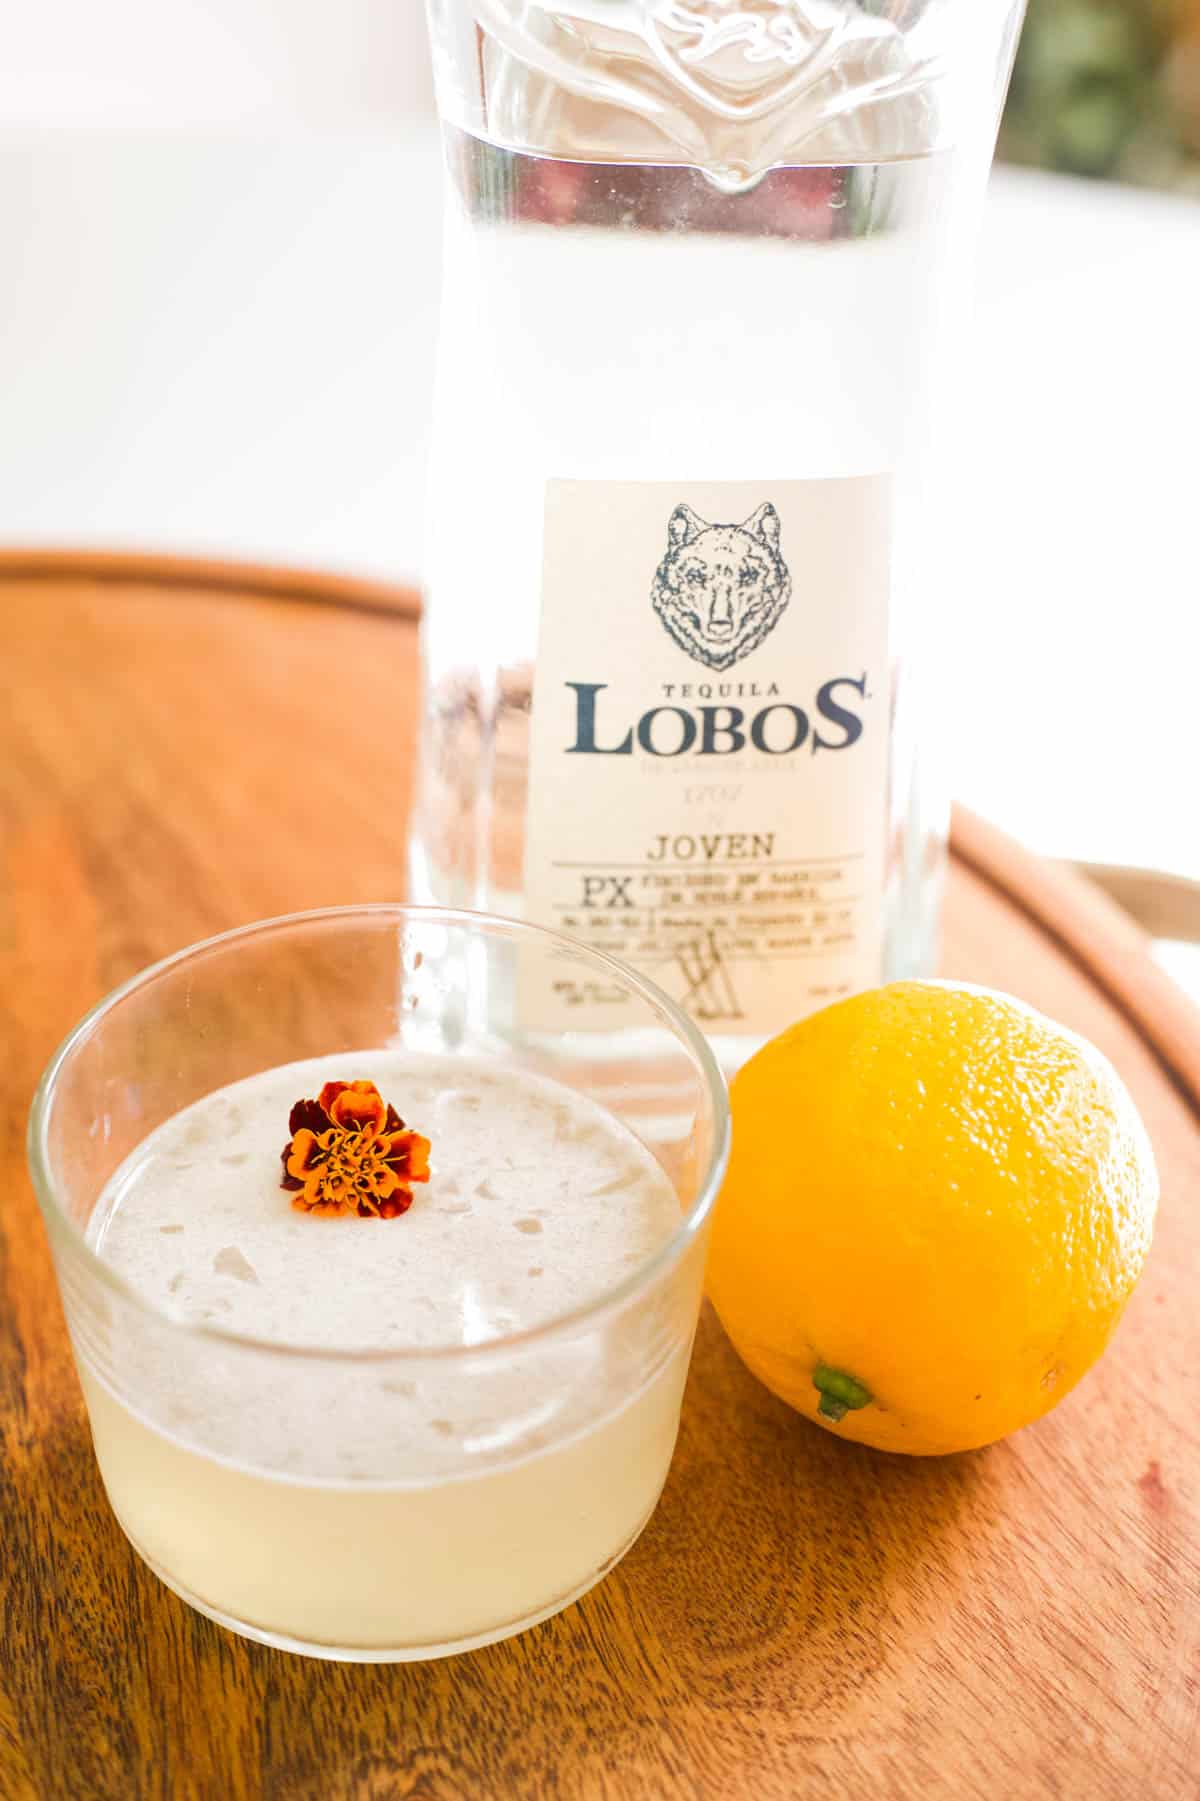 A glass with a tequila sour recipe in it next to a fresh lemon and bottle of tequila.